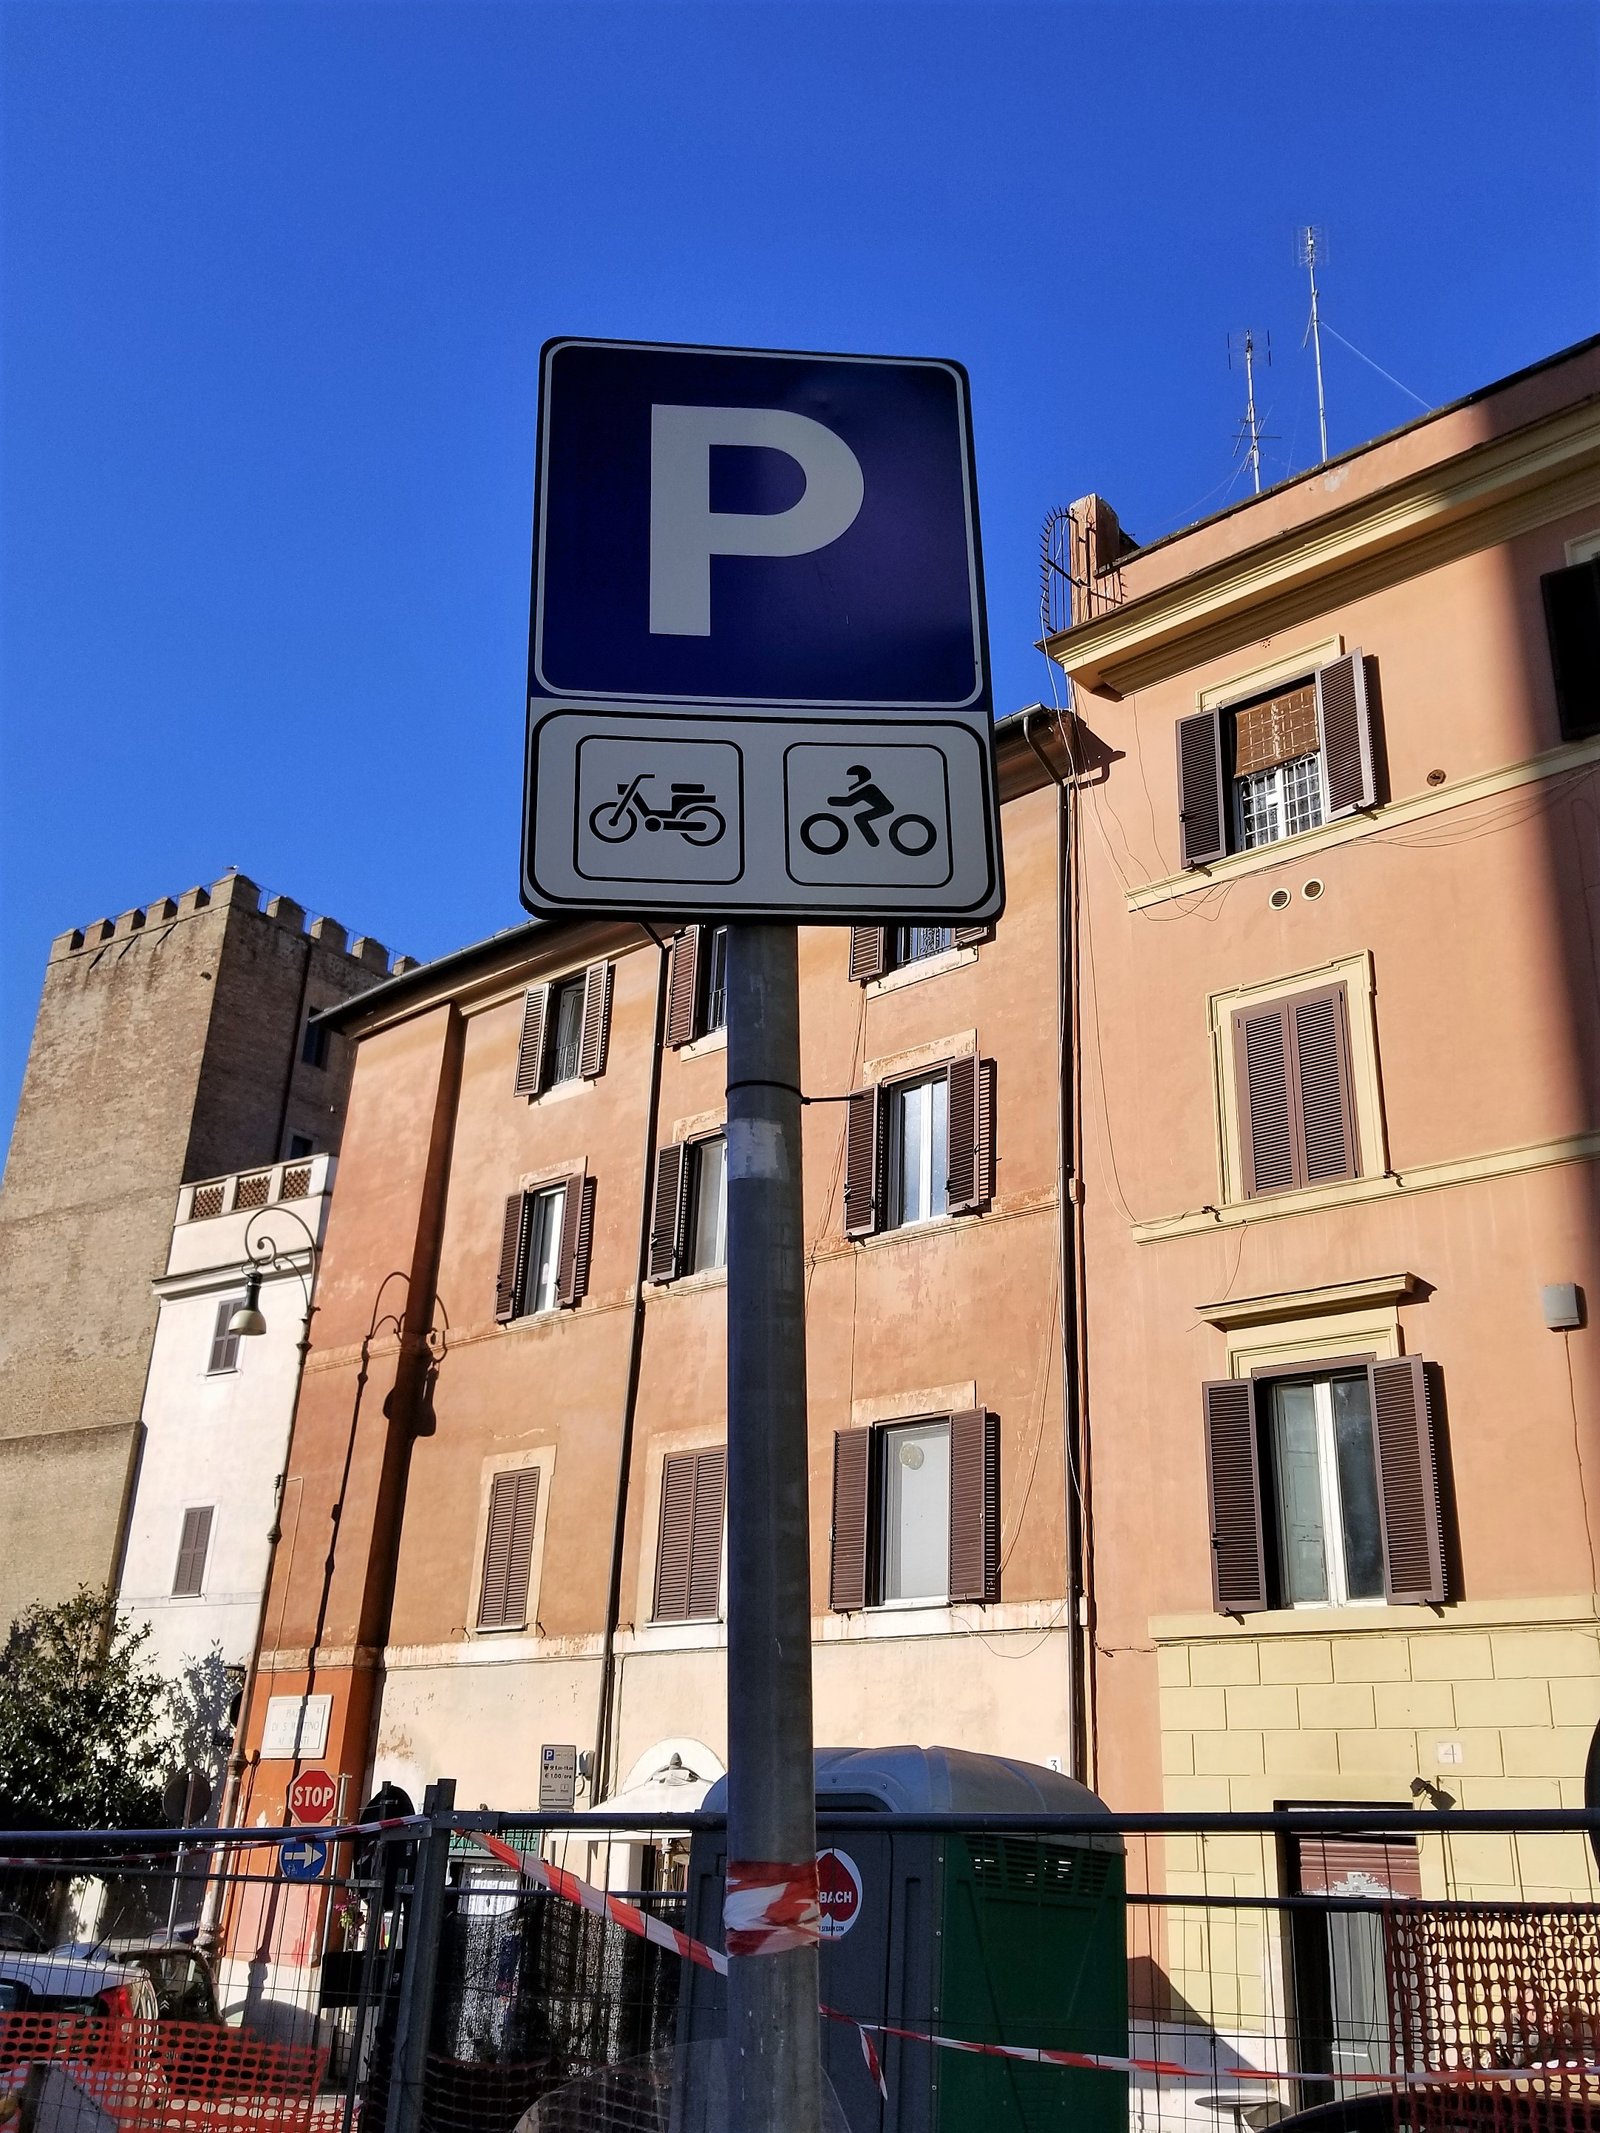 Parking sign in Rome, Italy. ouritalianjourney.com